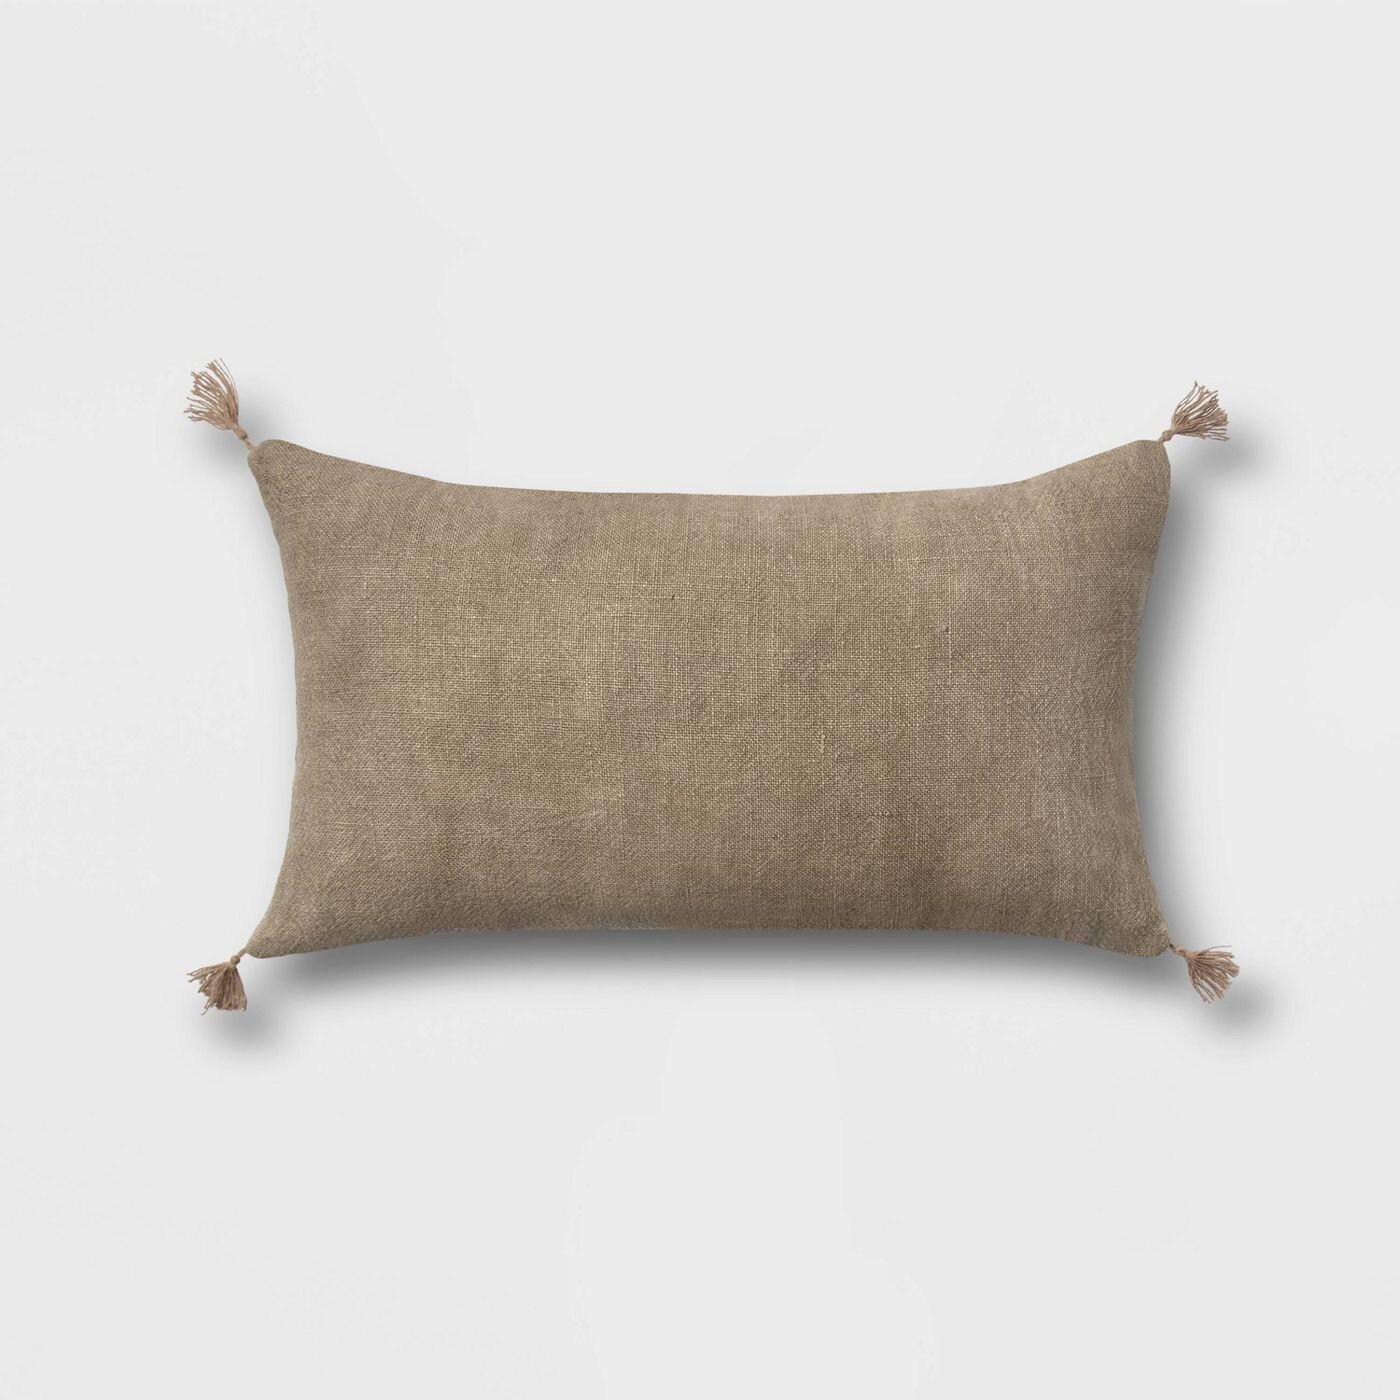 Washed Linen Lumbar Throw Pillow with Tassels - Threshold™